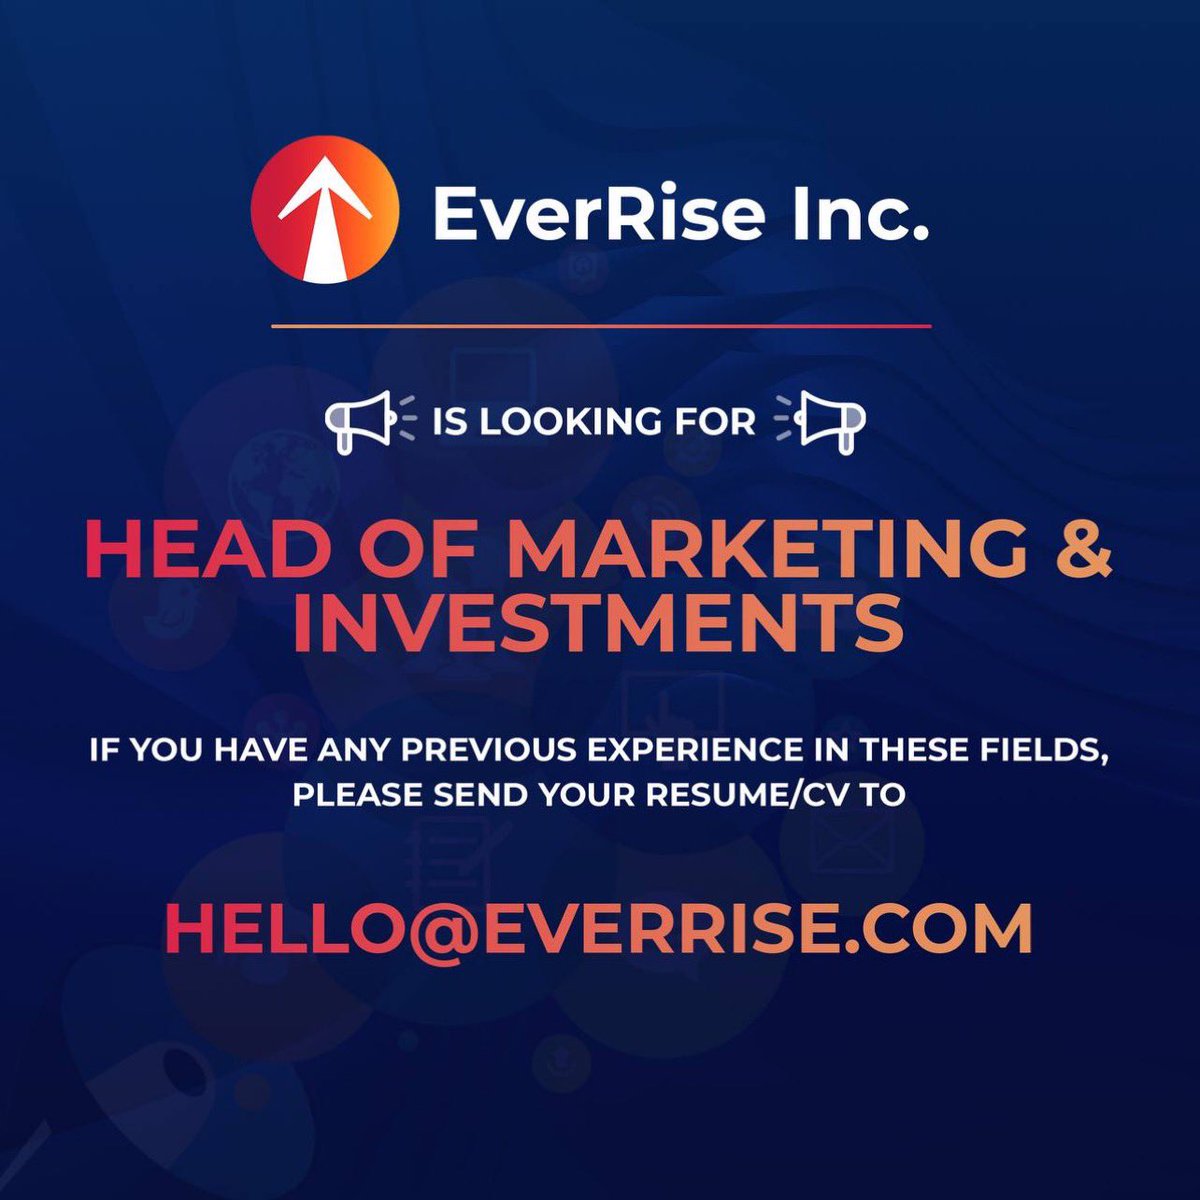 Do you have what it takes ?
@EverRise is looking for a New Head of Marketing.
Serious inquiries only pls.

#DefiNews #altcoin #Defi #Crypto #BSC #BSCGems #Polygon #ETH #AVAX    #Ethereum  #CoinMarketCap #tokens #jobs #marketing #Crypto_Marketing_Titans